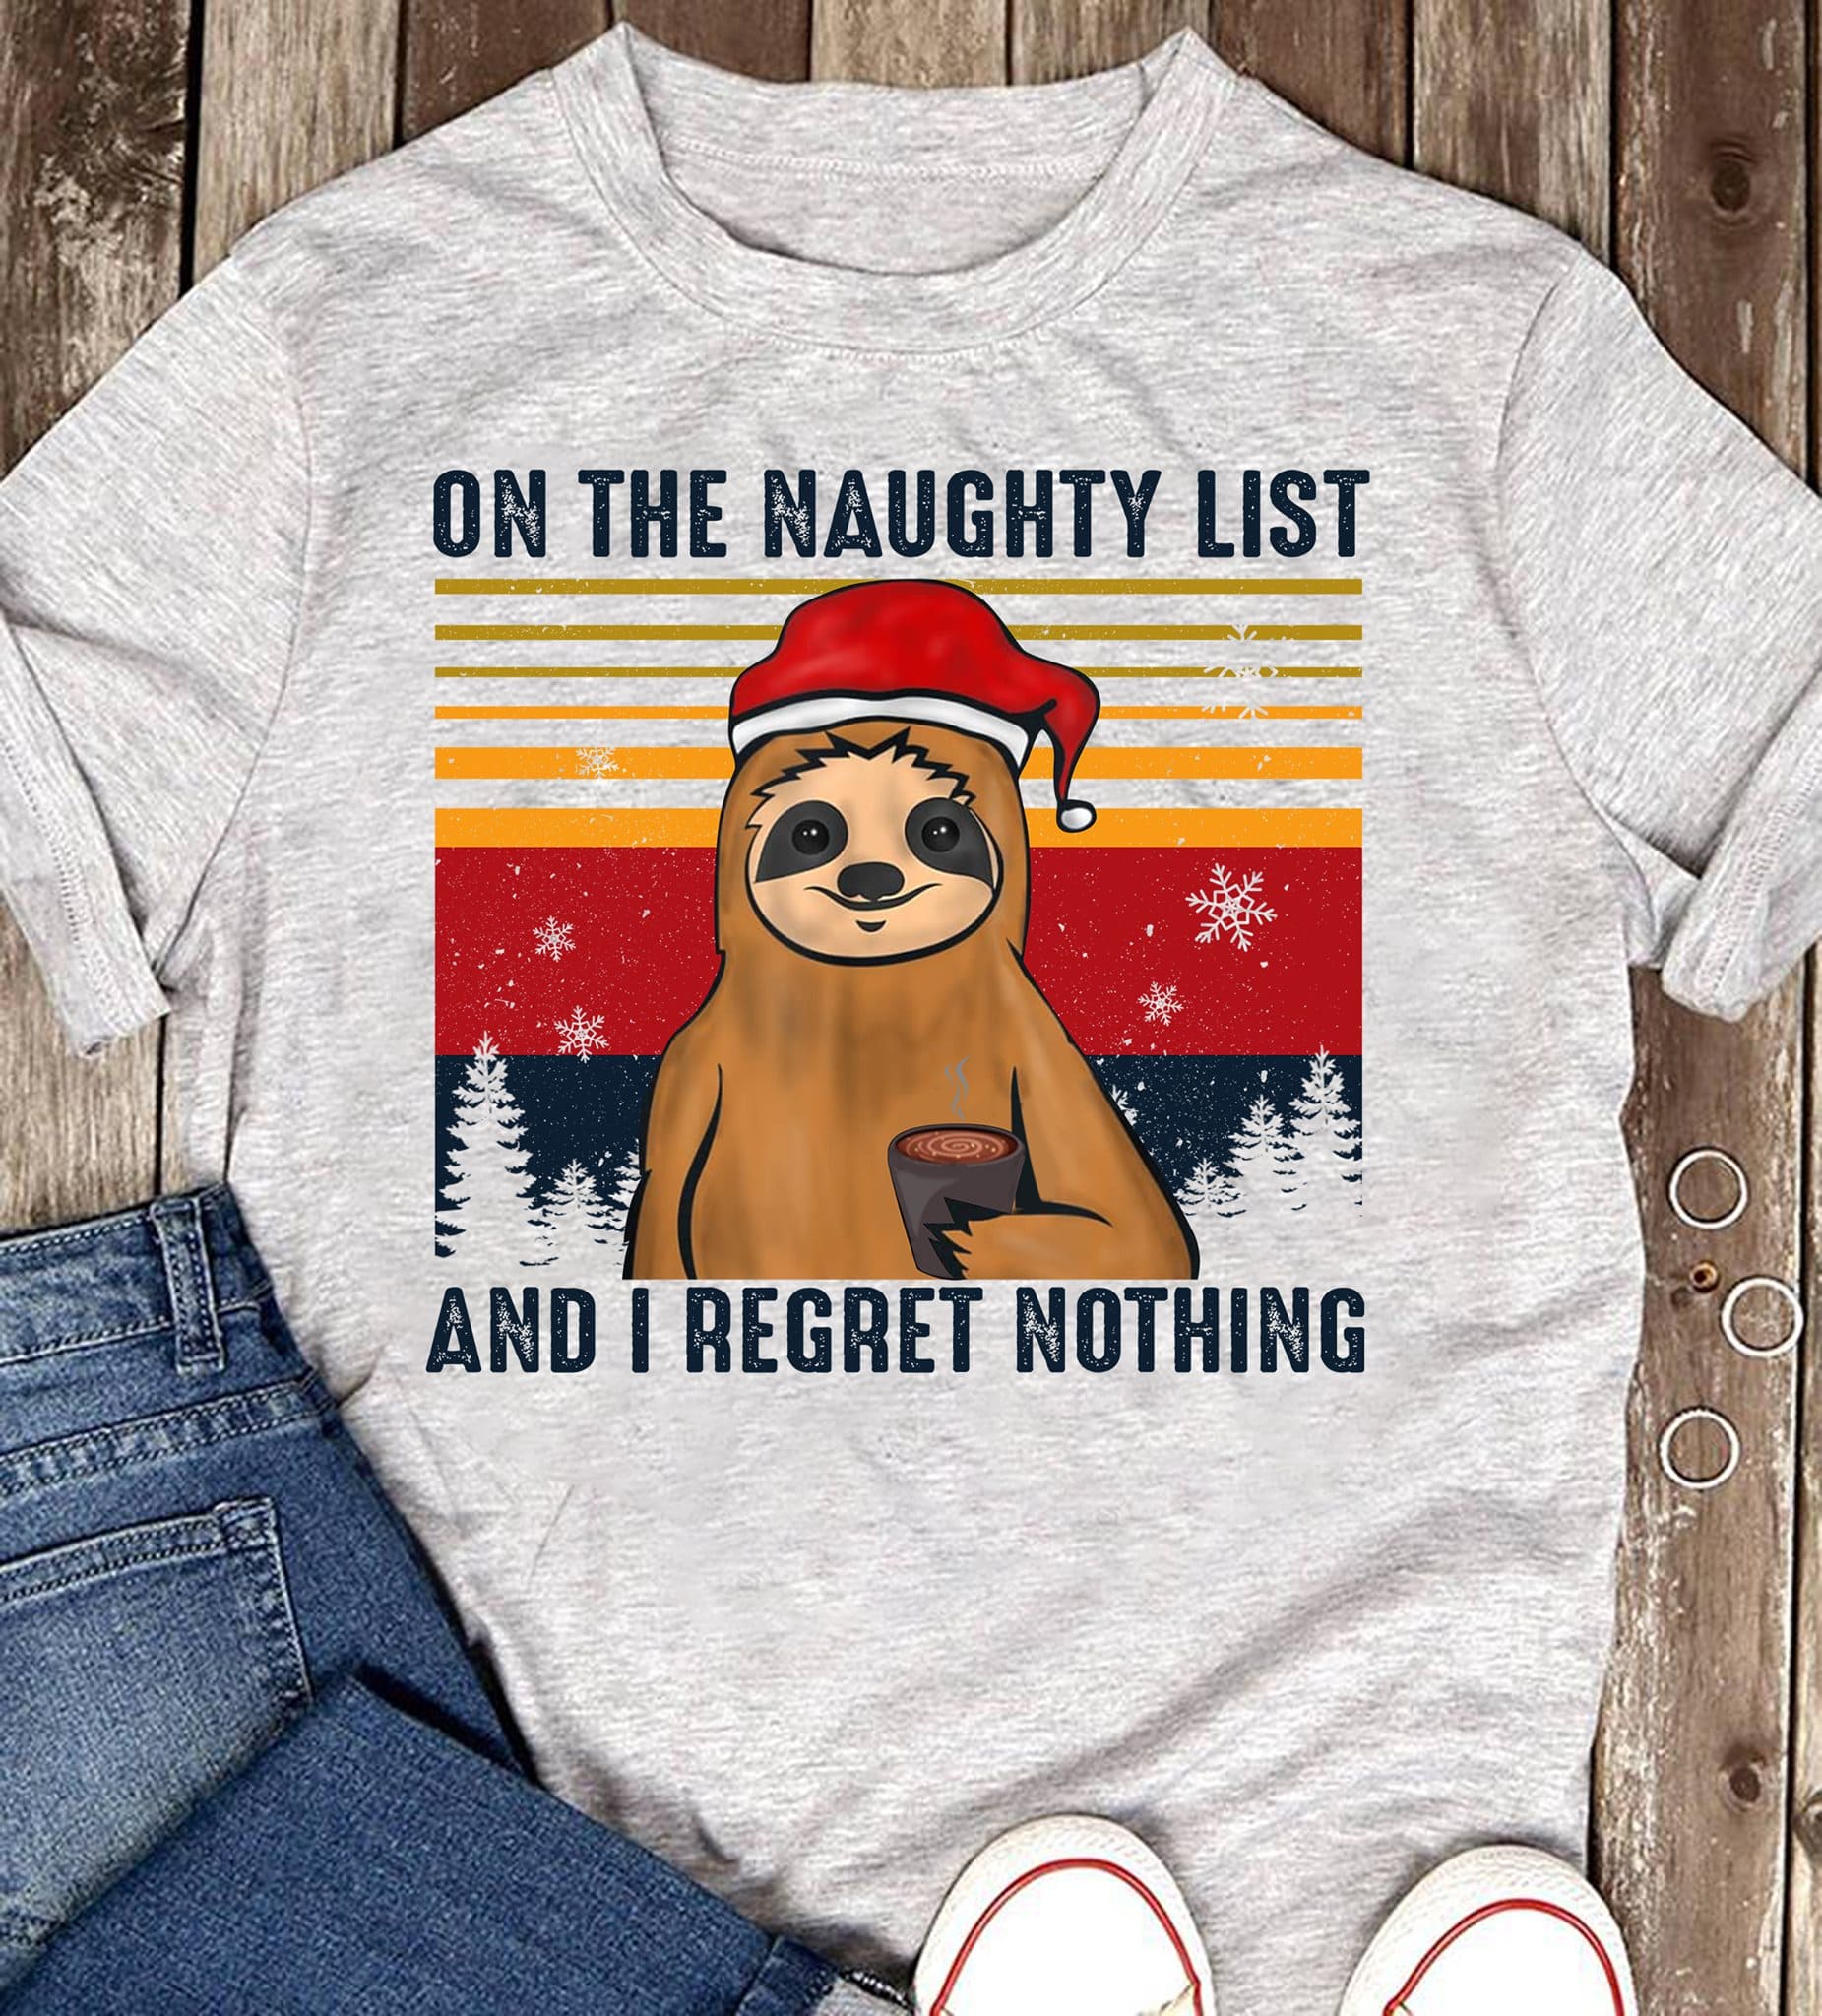 On the naughty list and I regret nothing - Santa Claus naughty list, Sloth for Christmas day